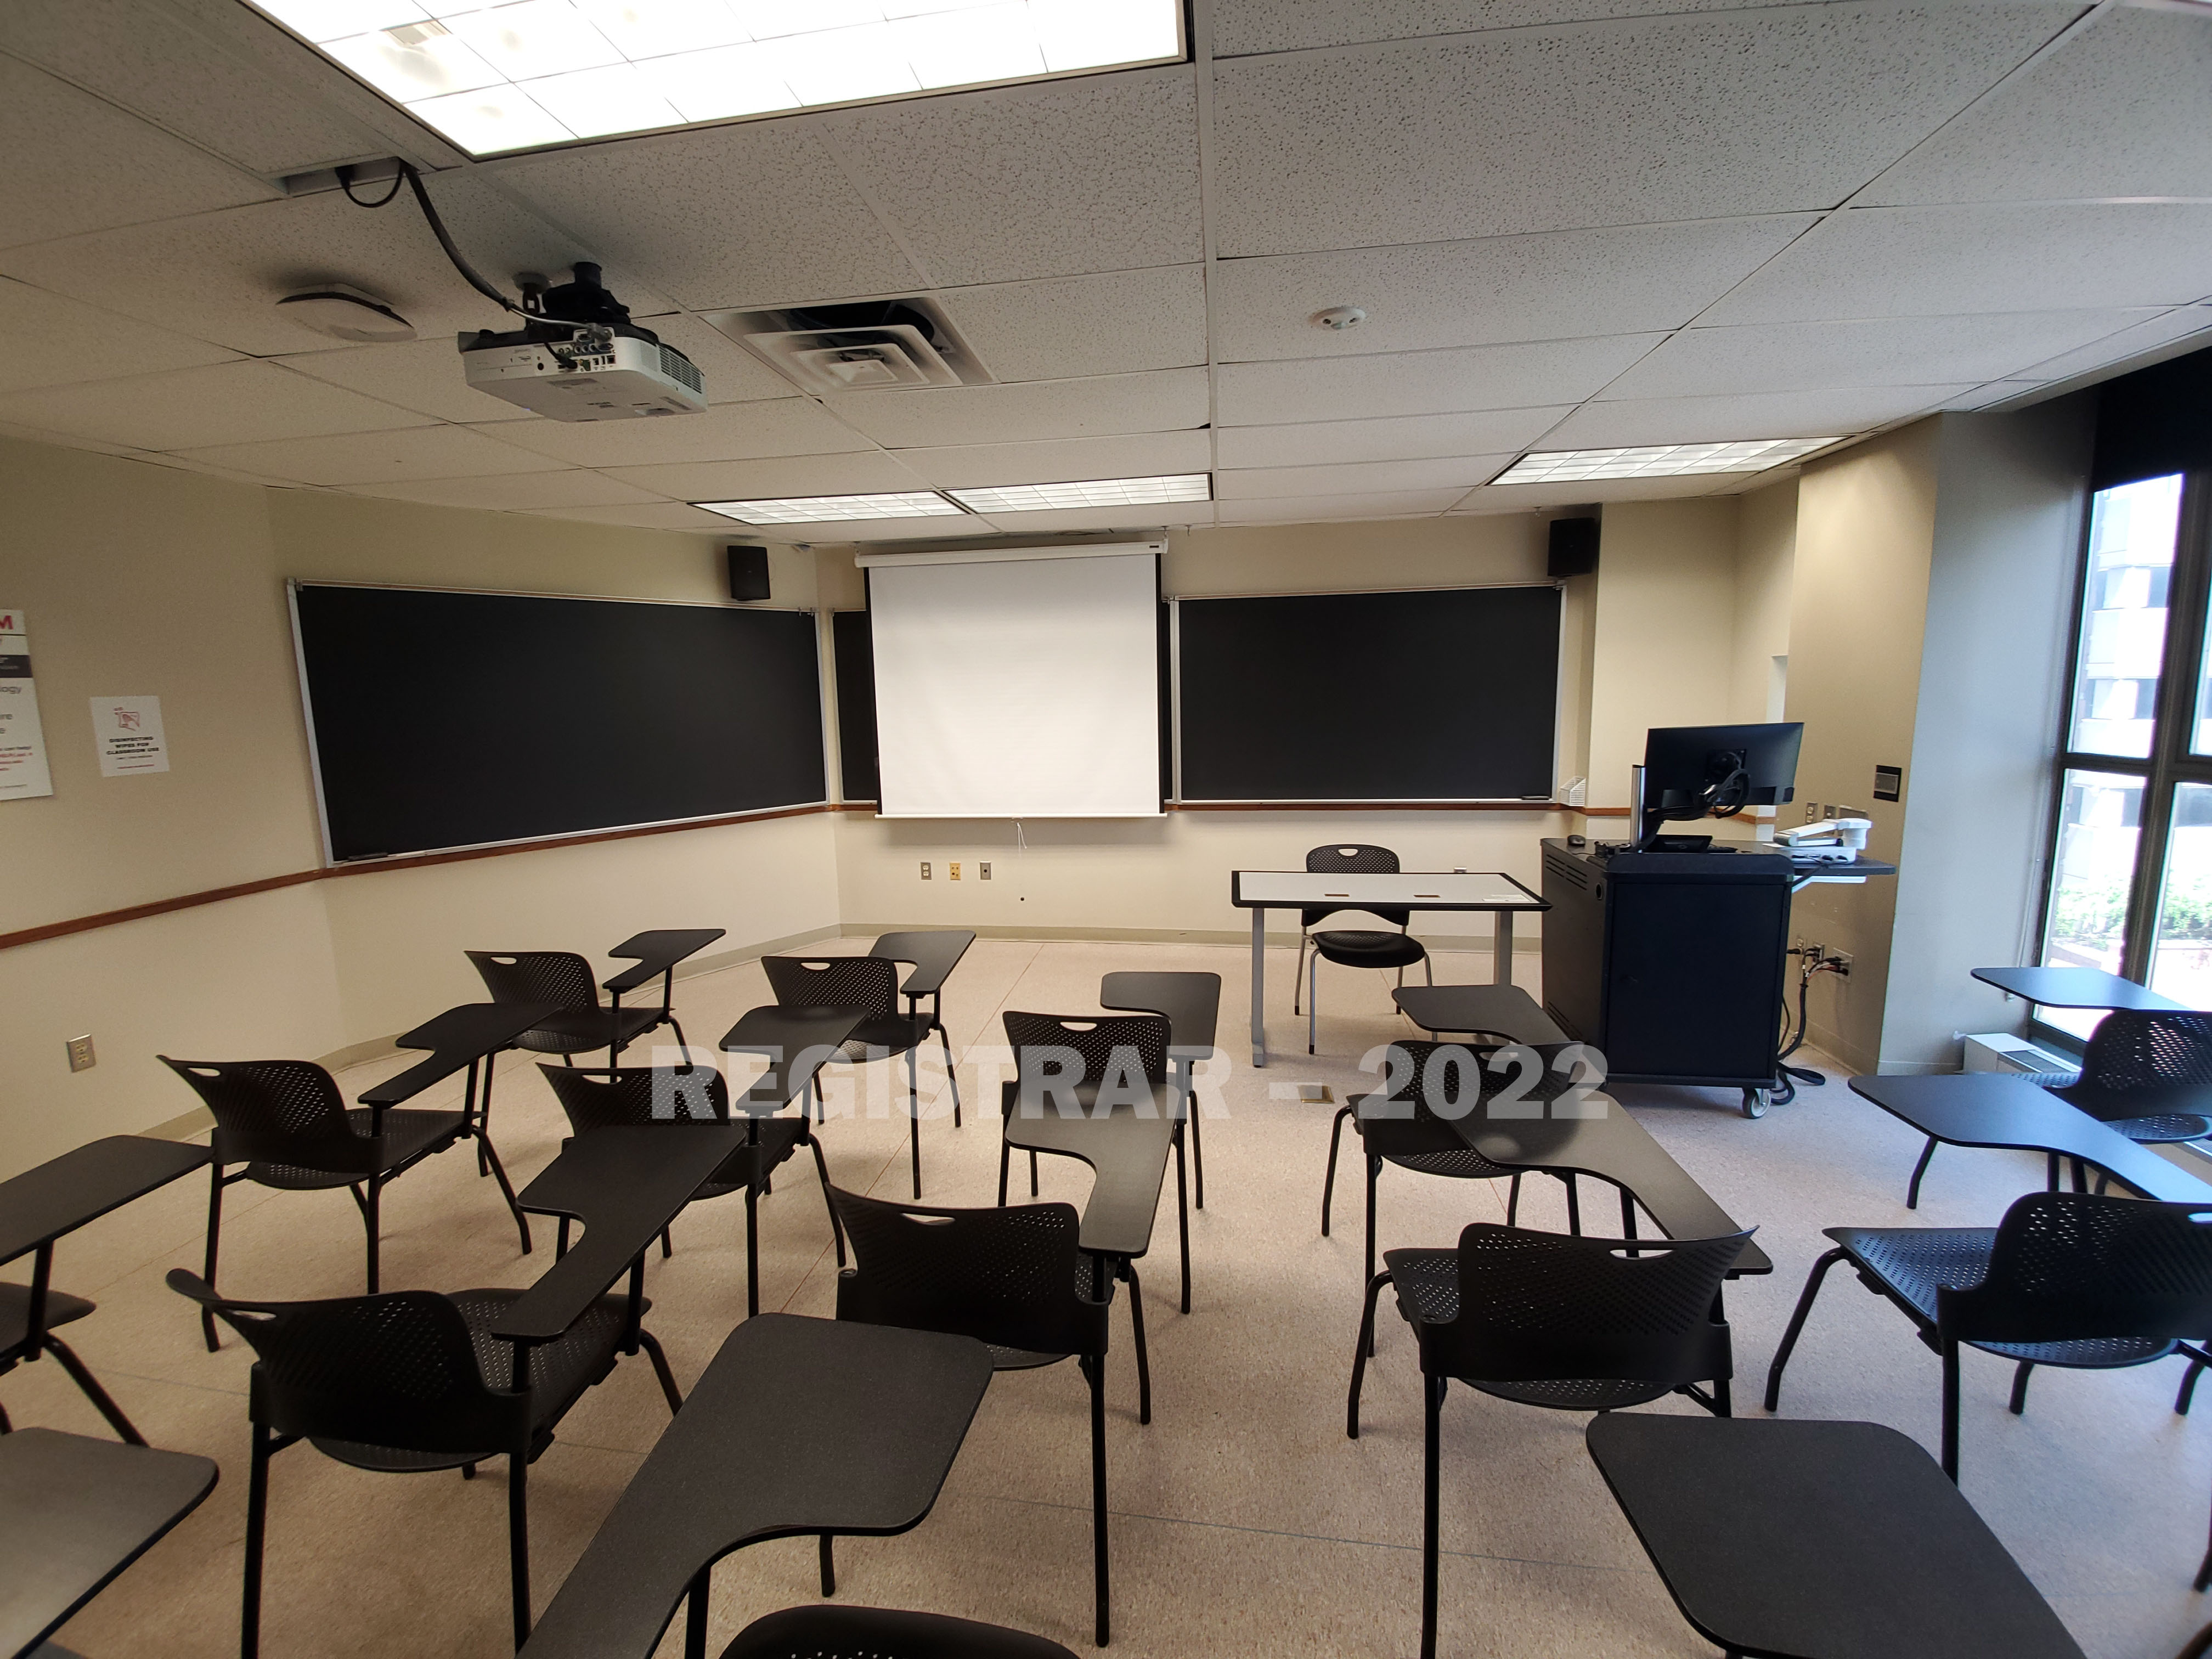 Enarson Classroom Building room 318 ultra wide angle view from the back of the room with projector screen down